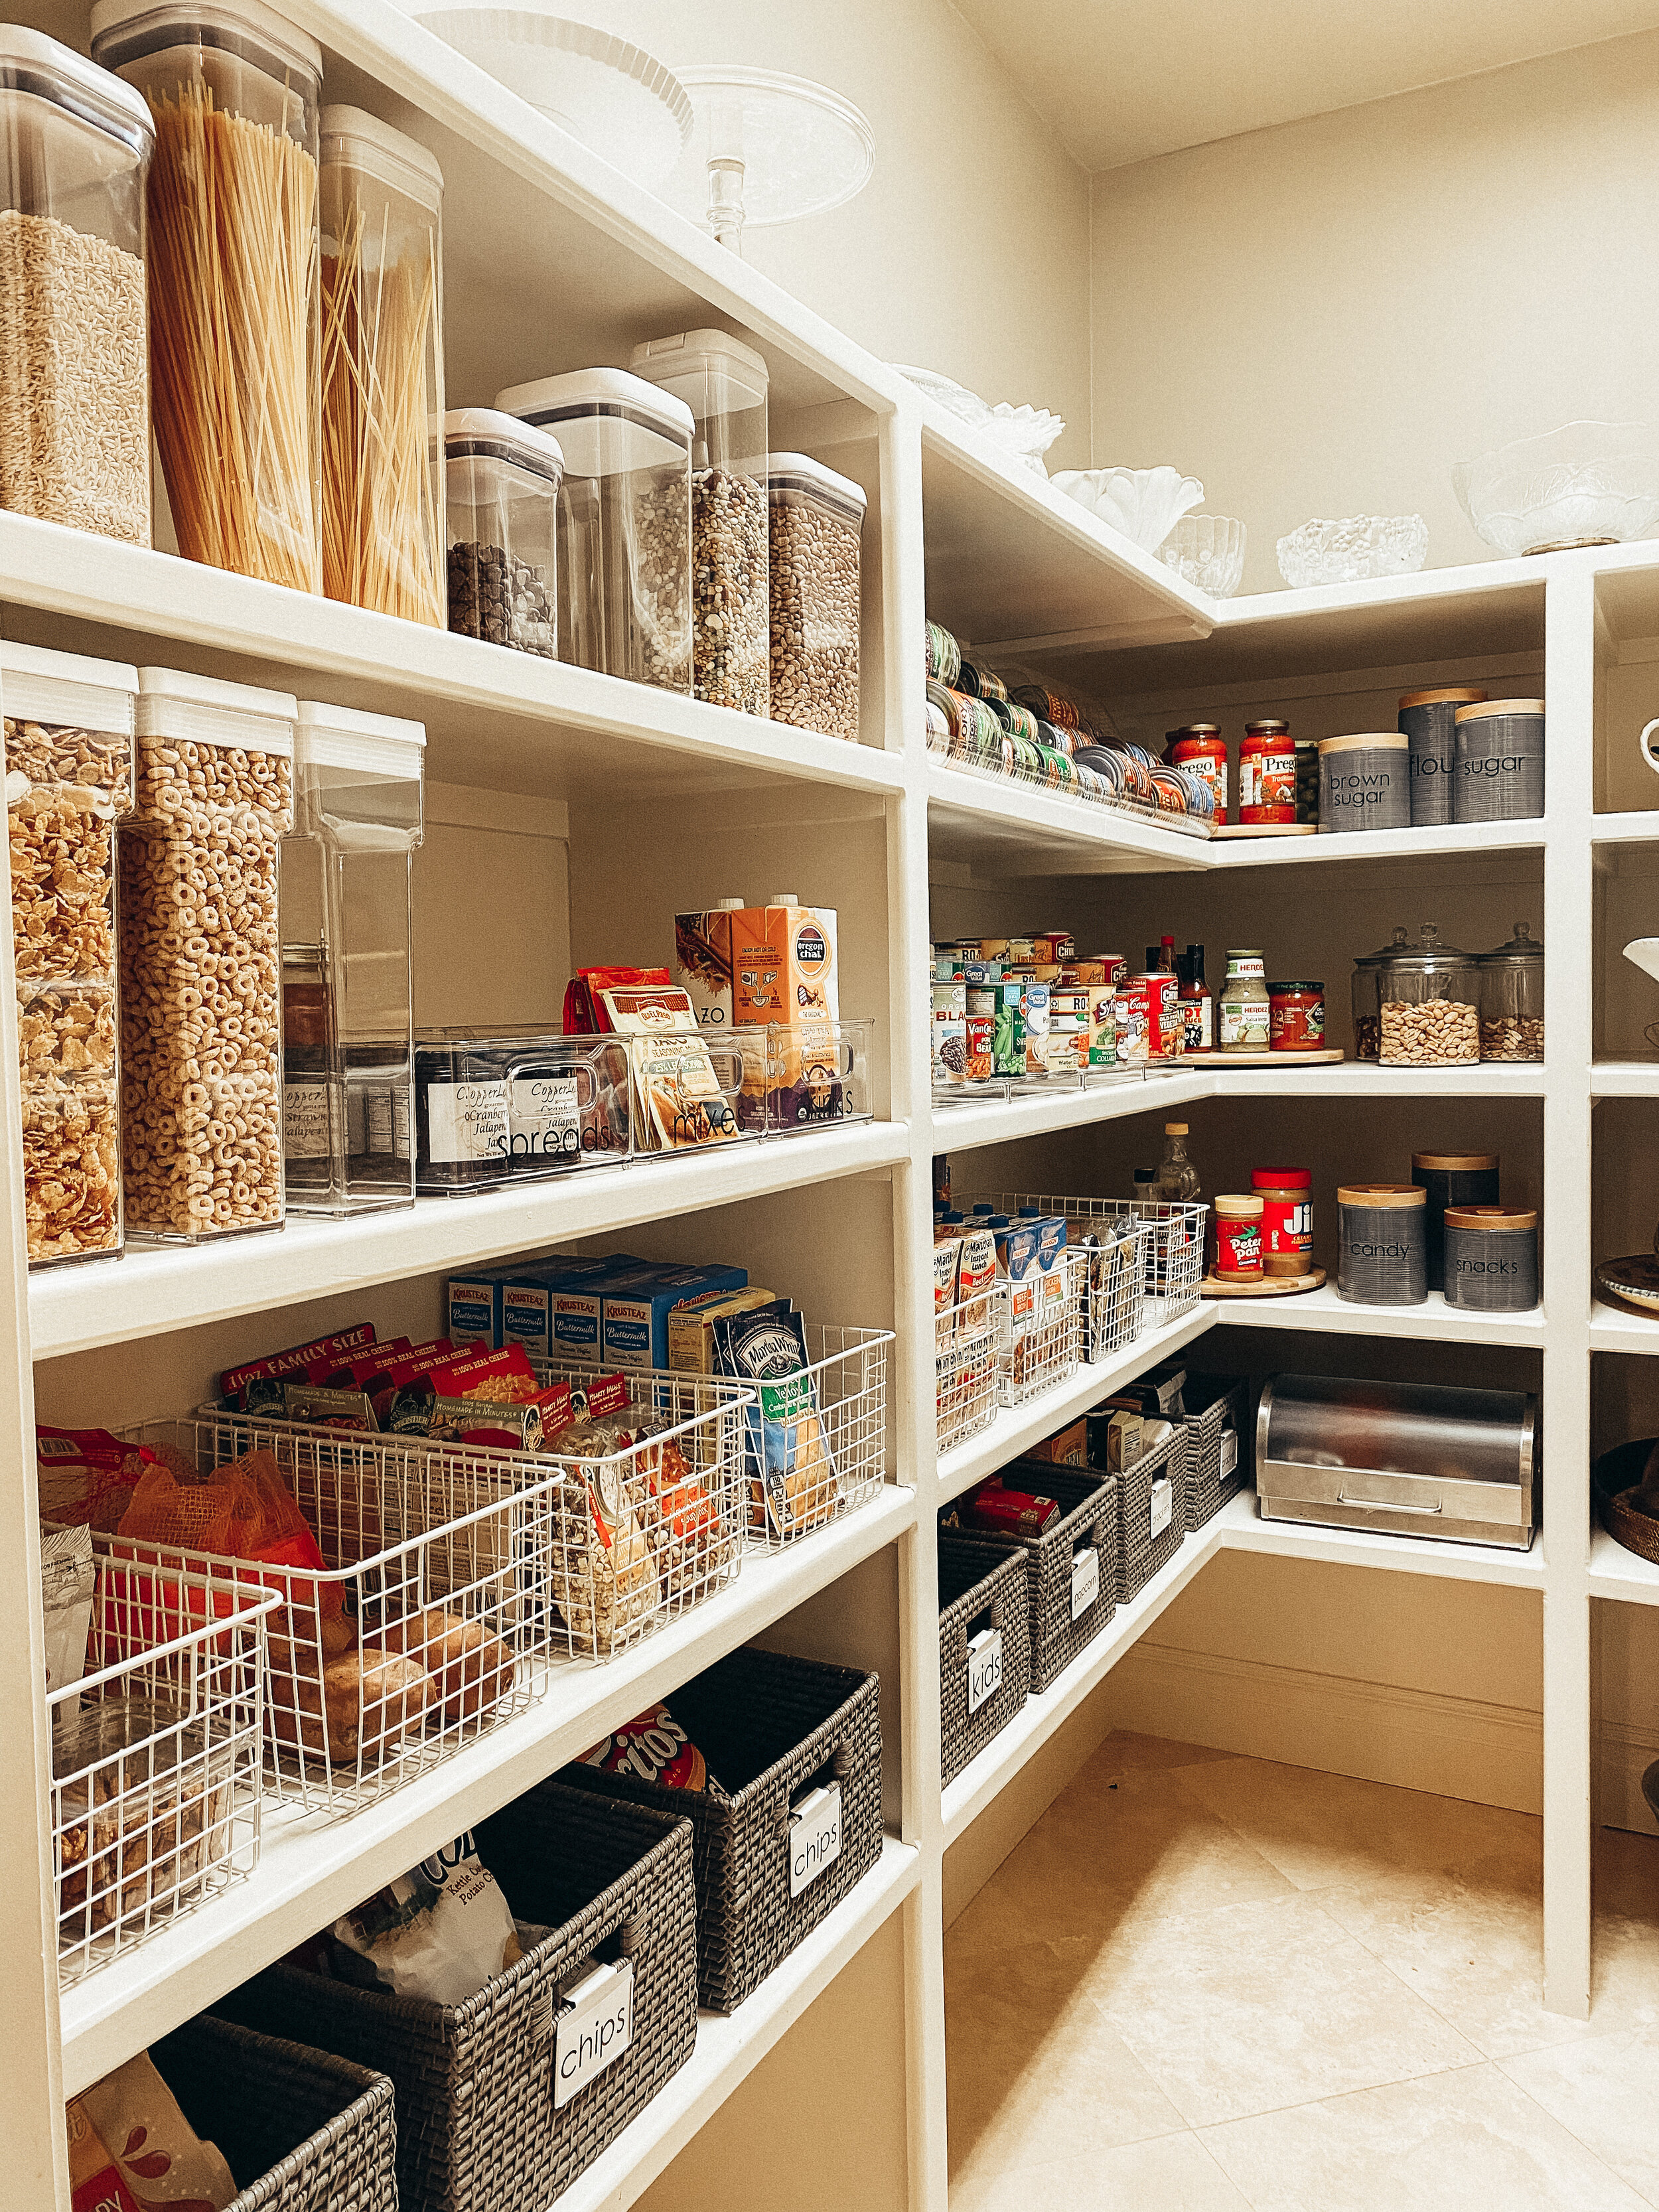 Large pantry organized with wire baskets and clear containers